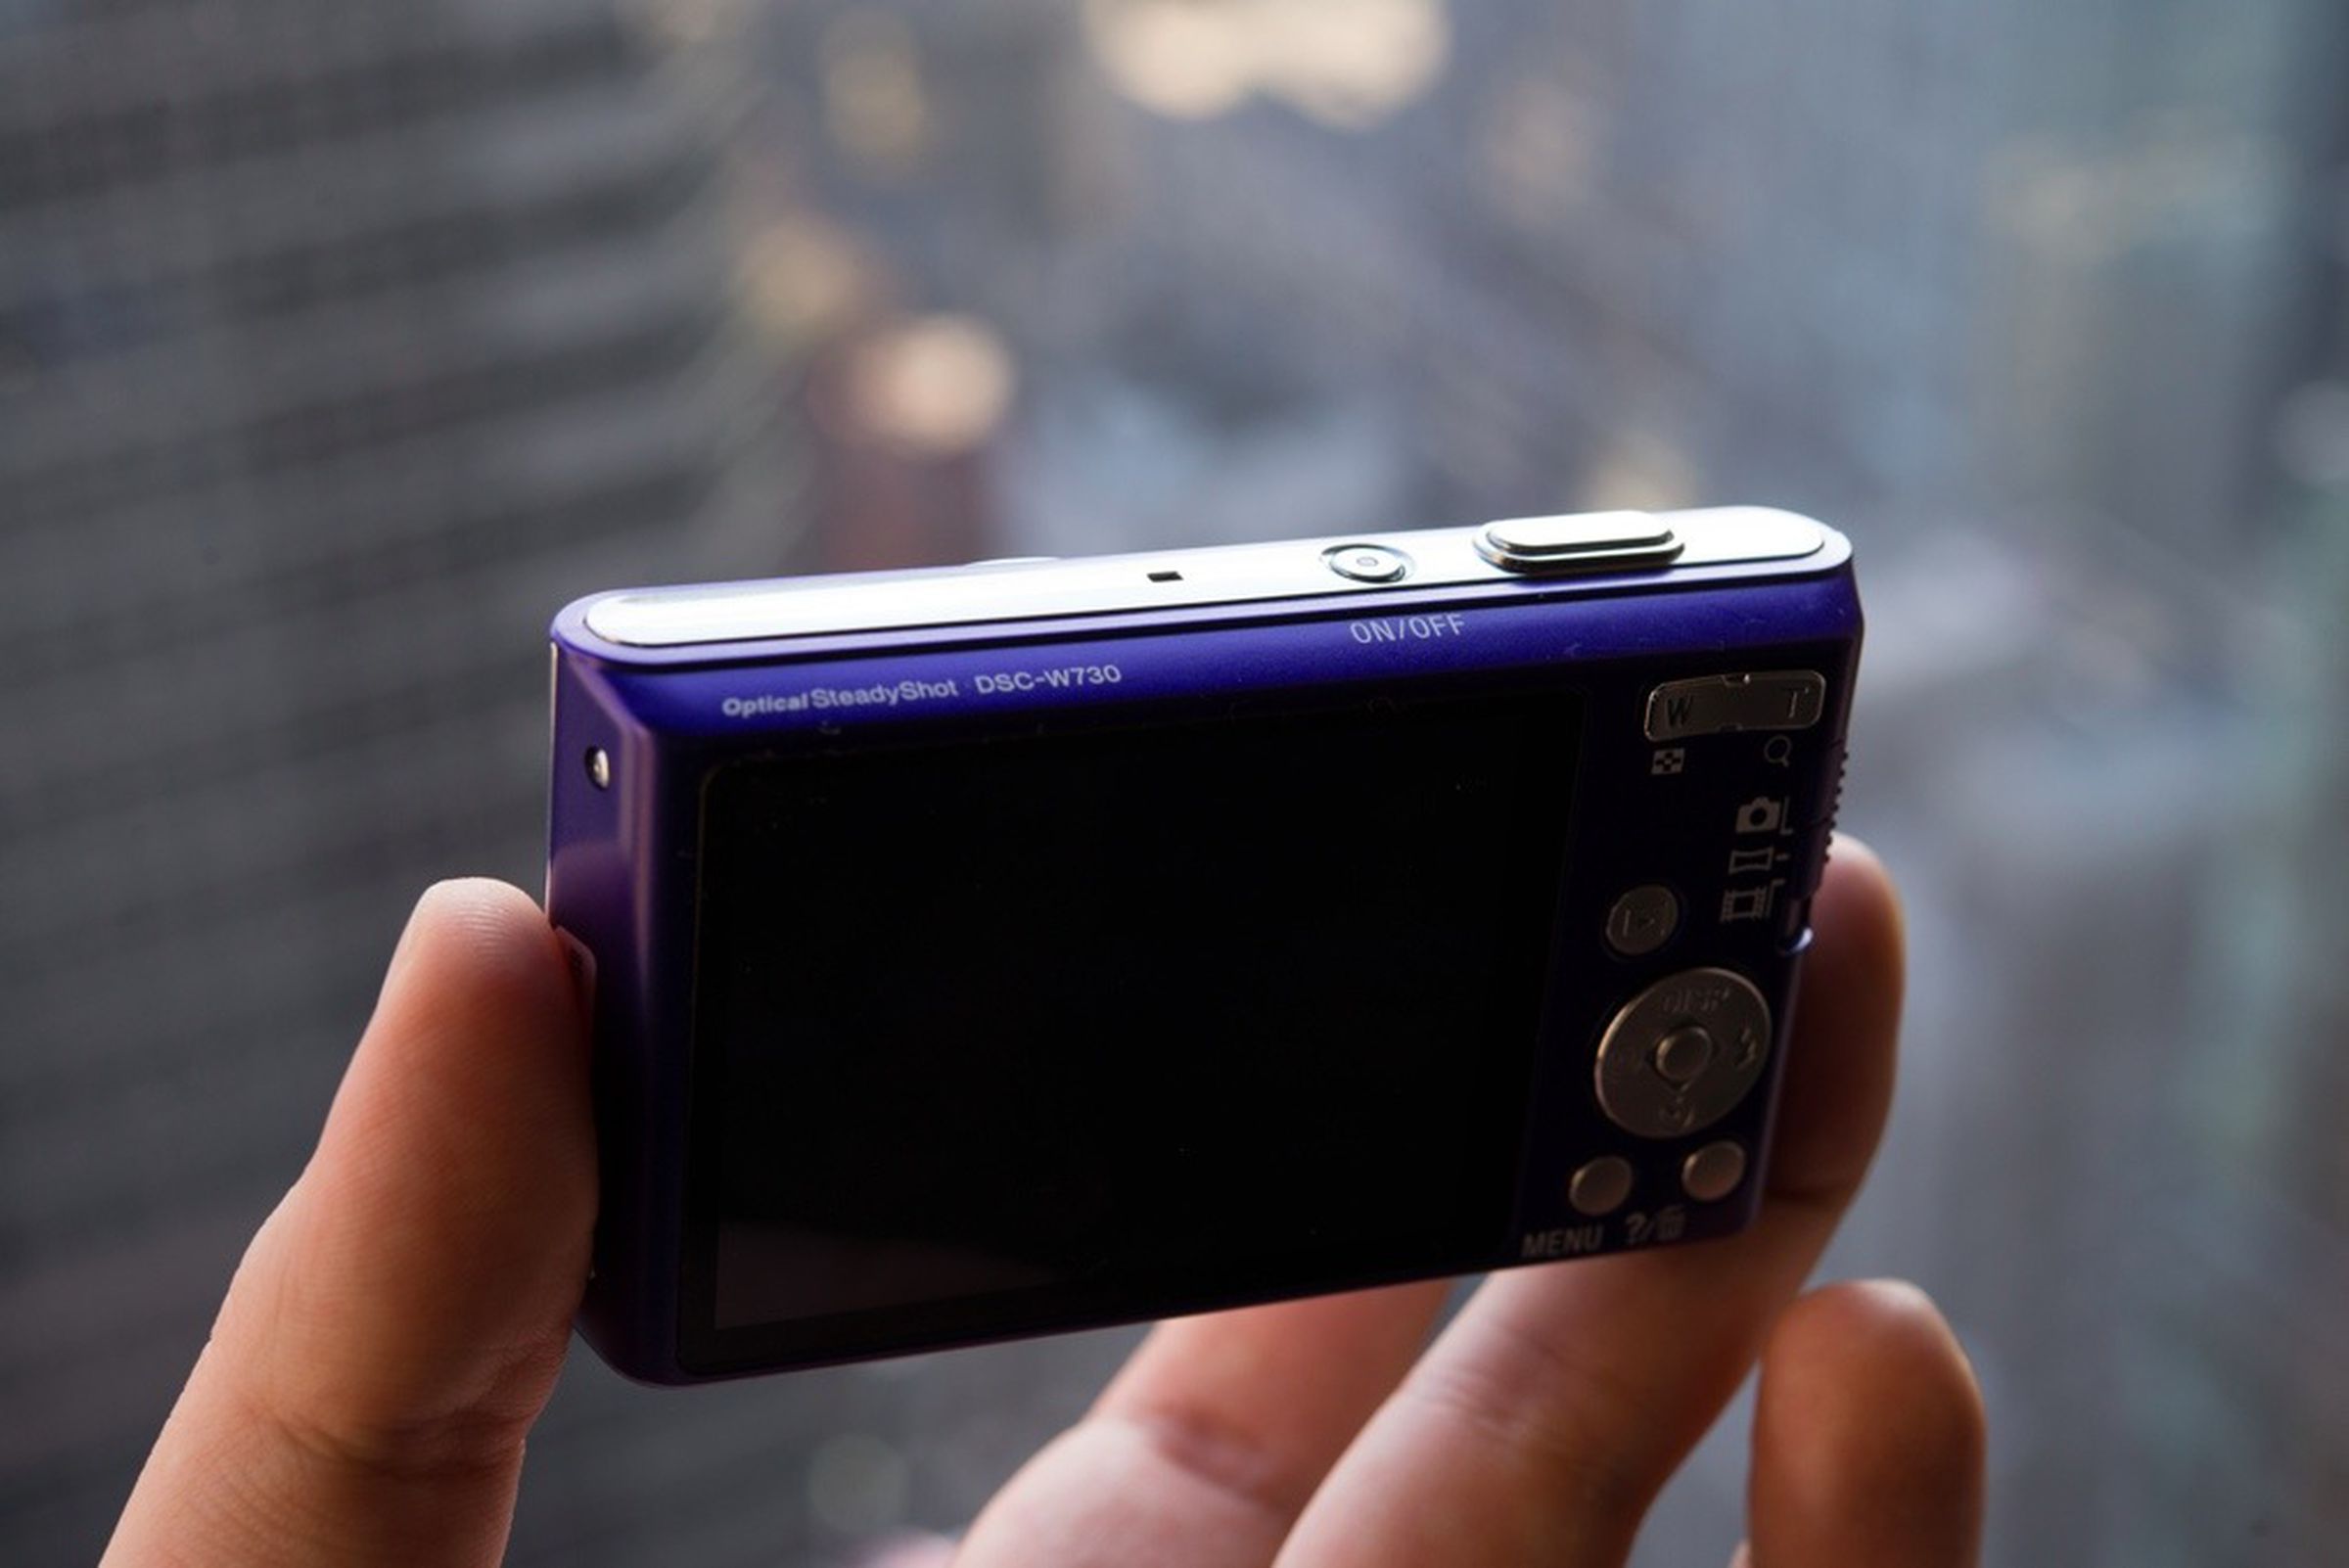 Sony's 2013 Cyber-shot lineup hands-on photos